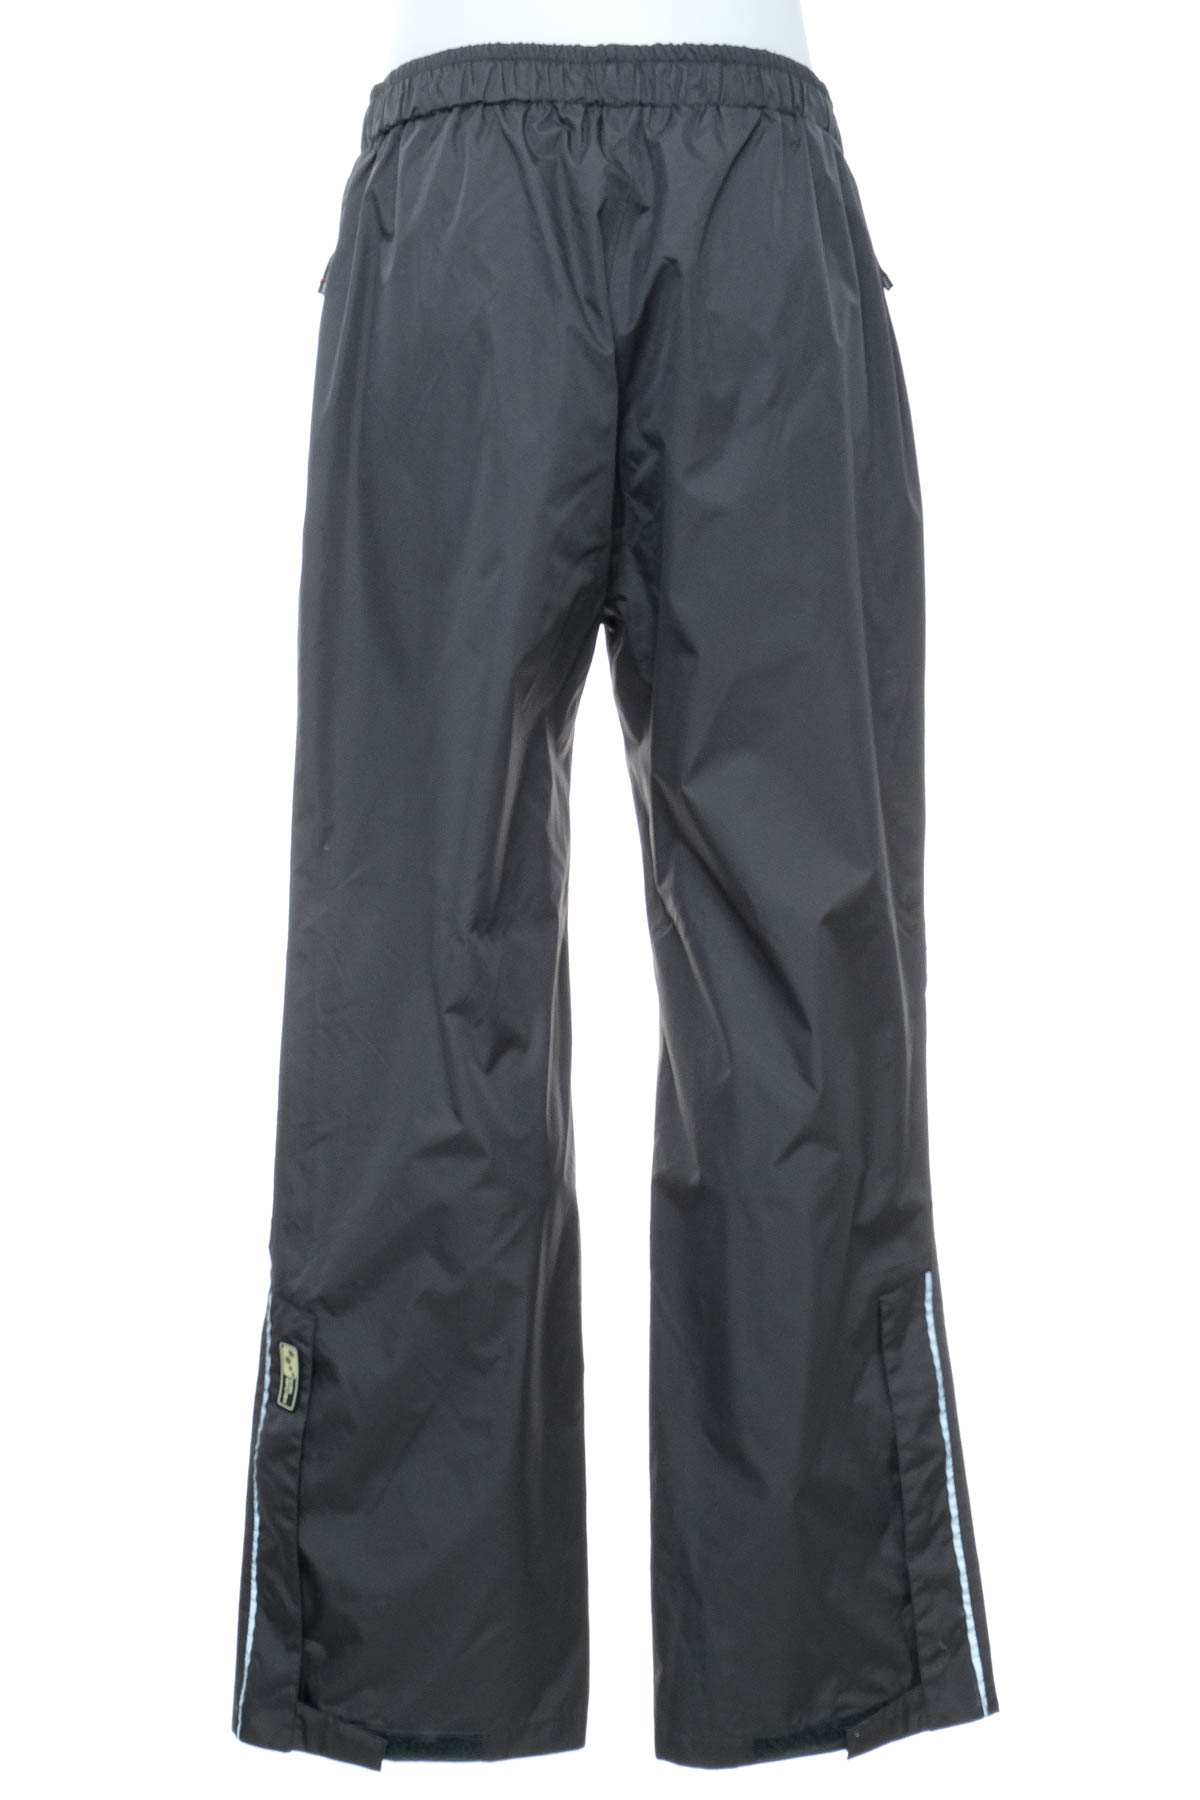 Men's trousers - System - 1